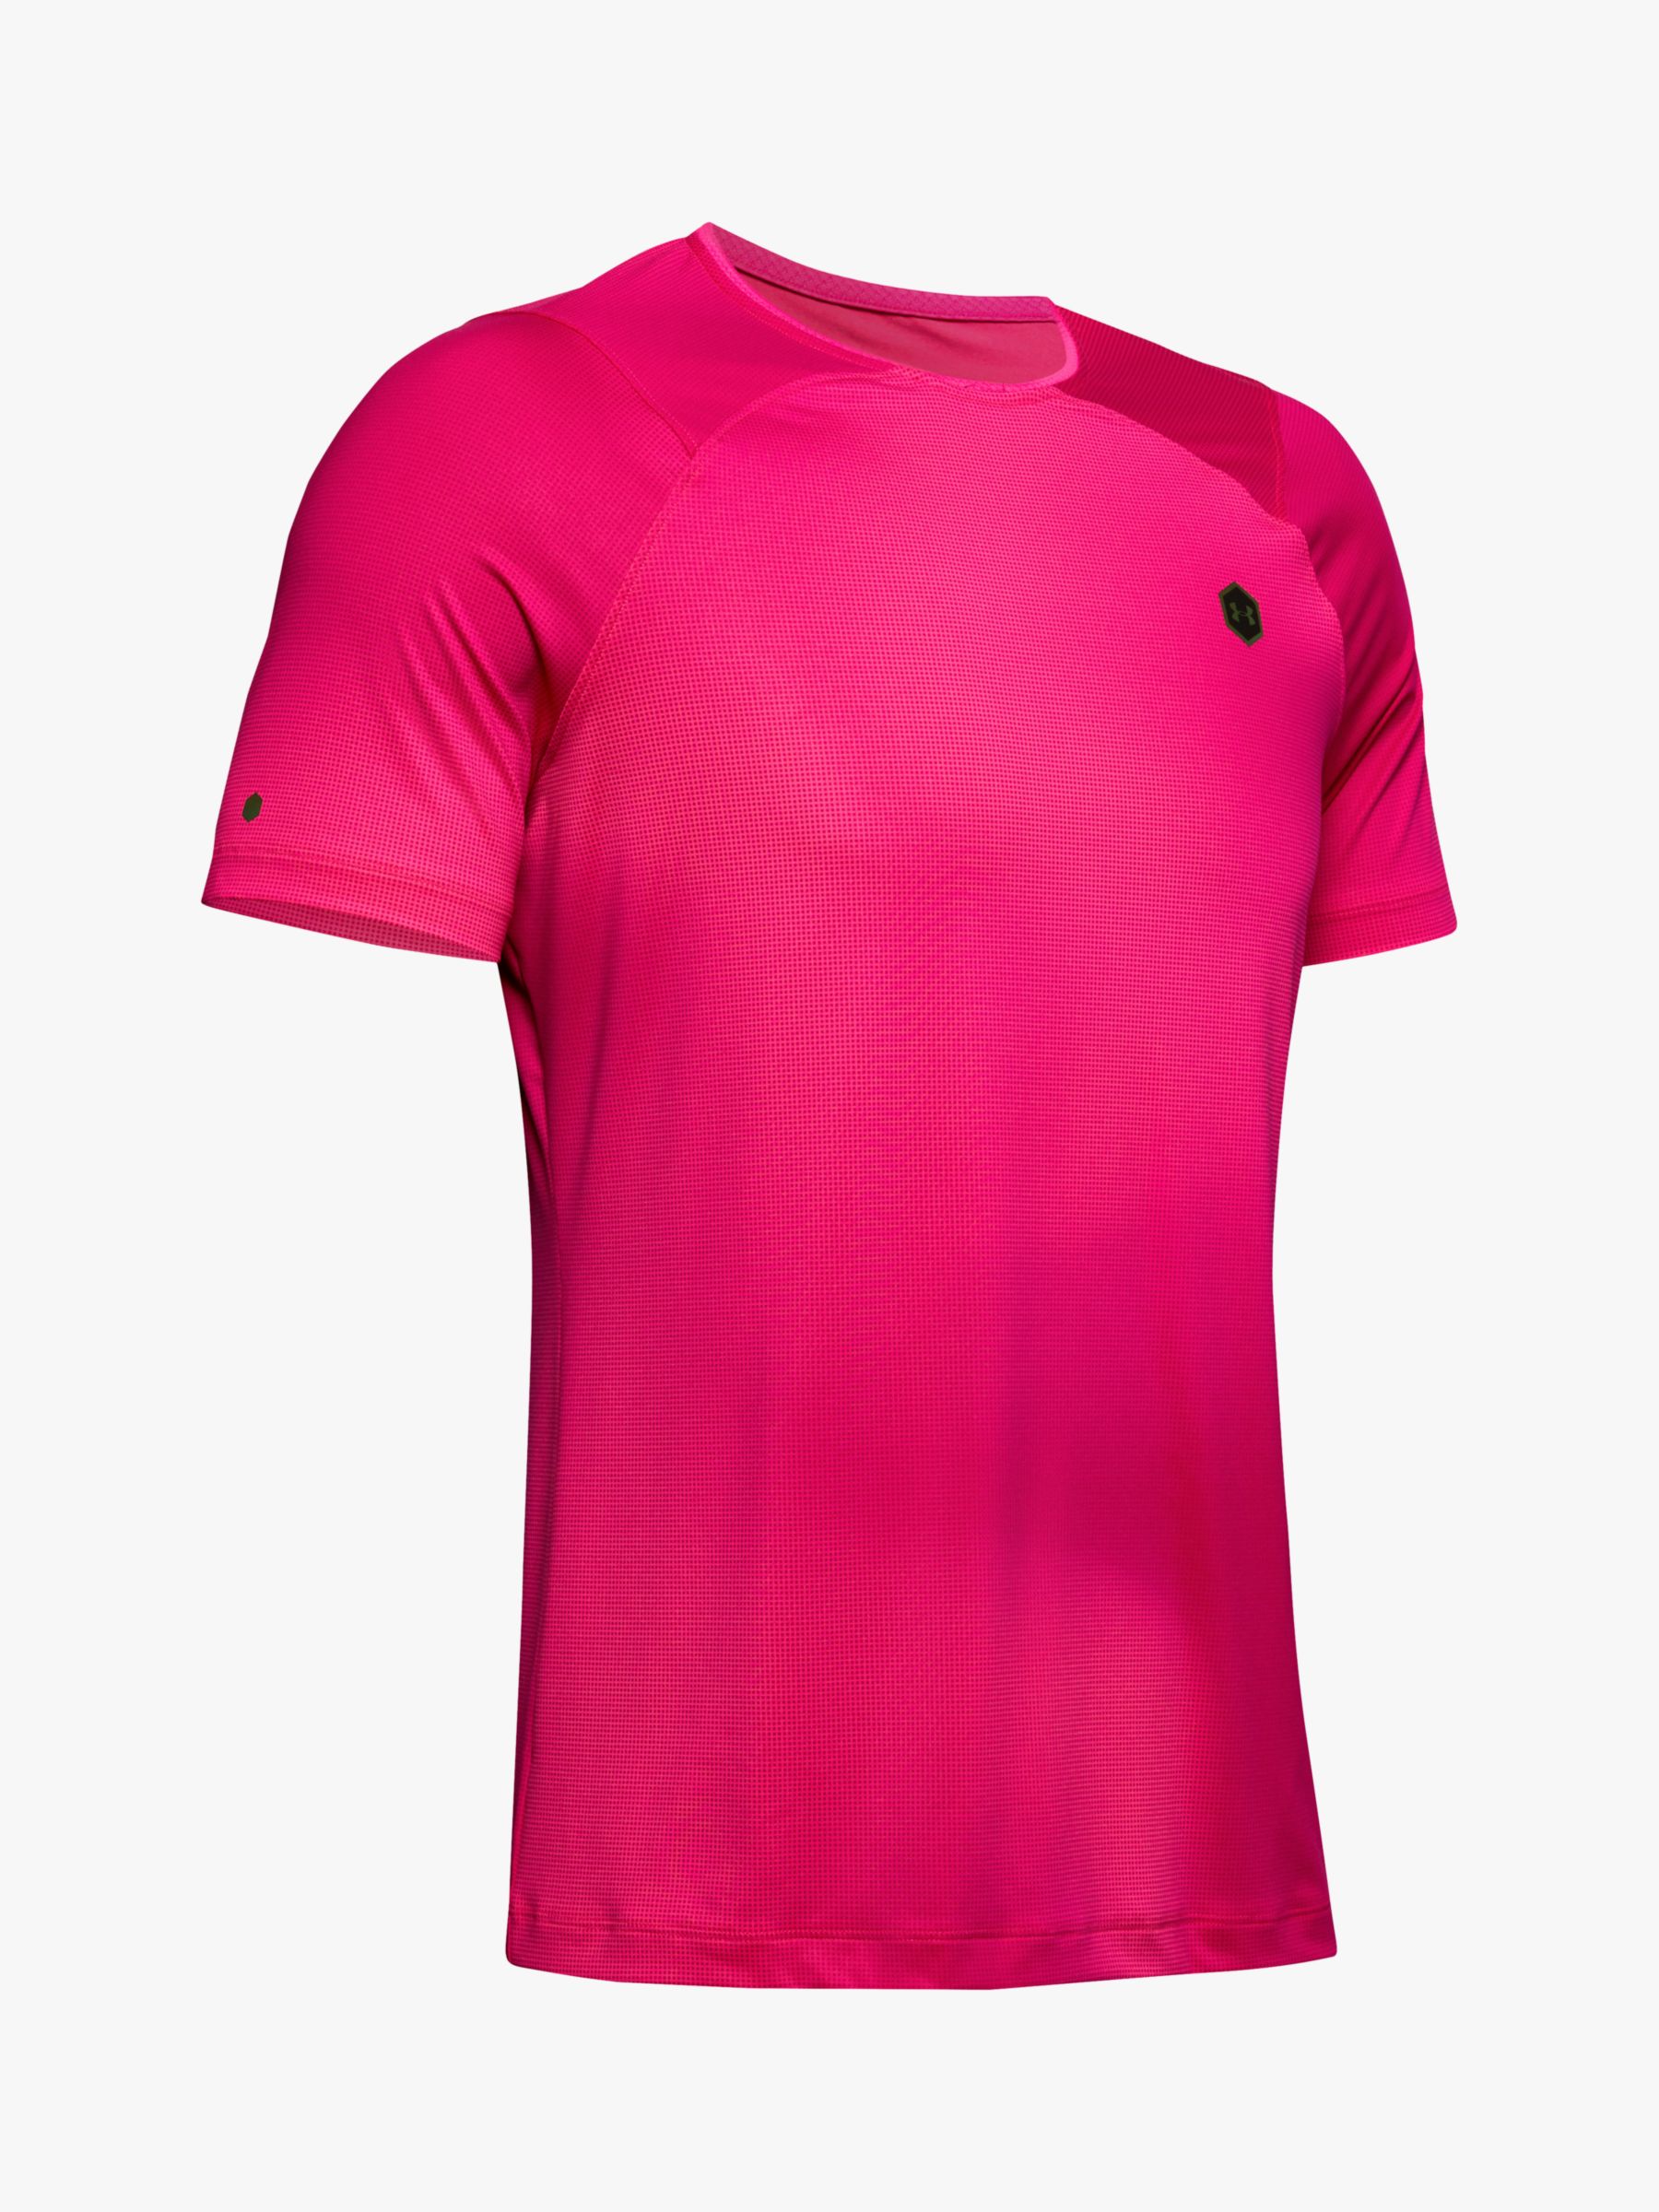 Under Armour Rush Mens Training Top Pink Fitted Short Sleeve Gym Workout T-Shirt 